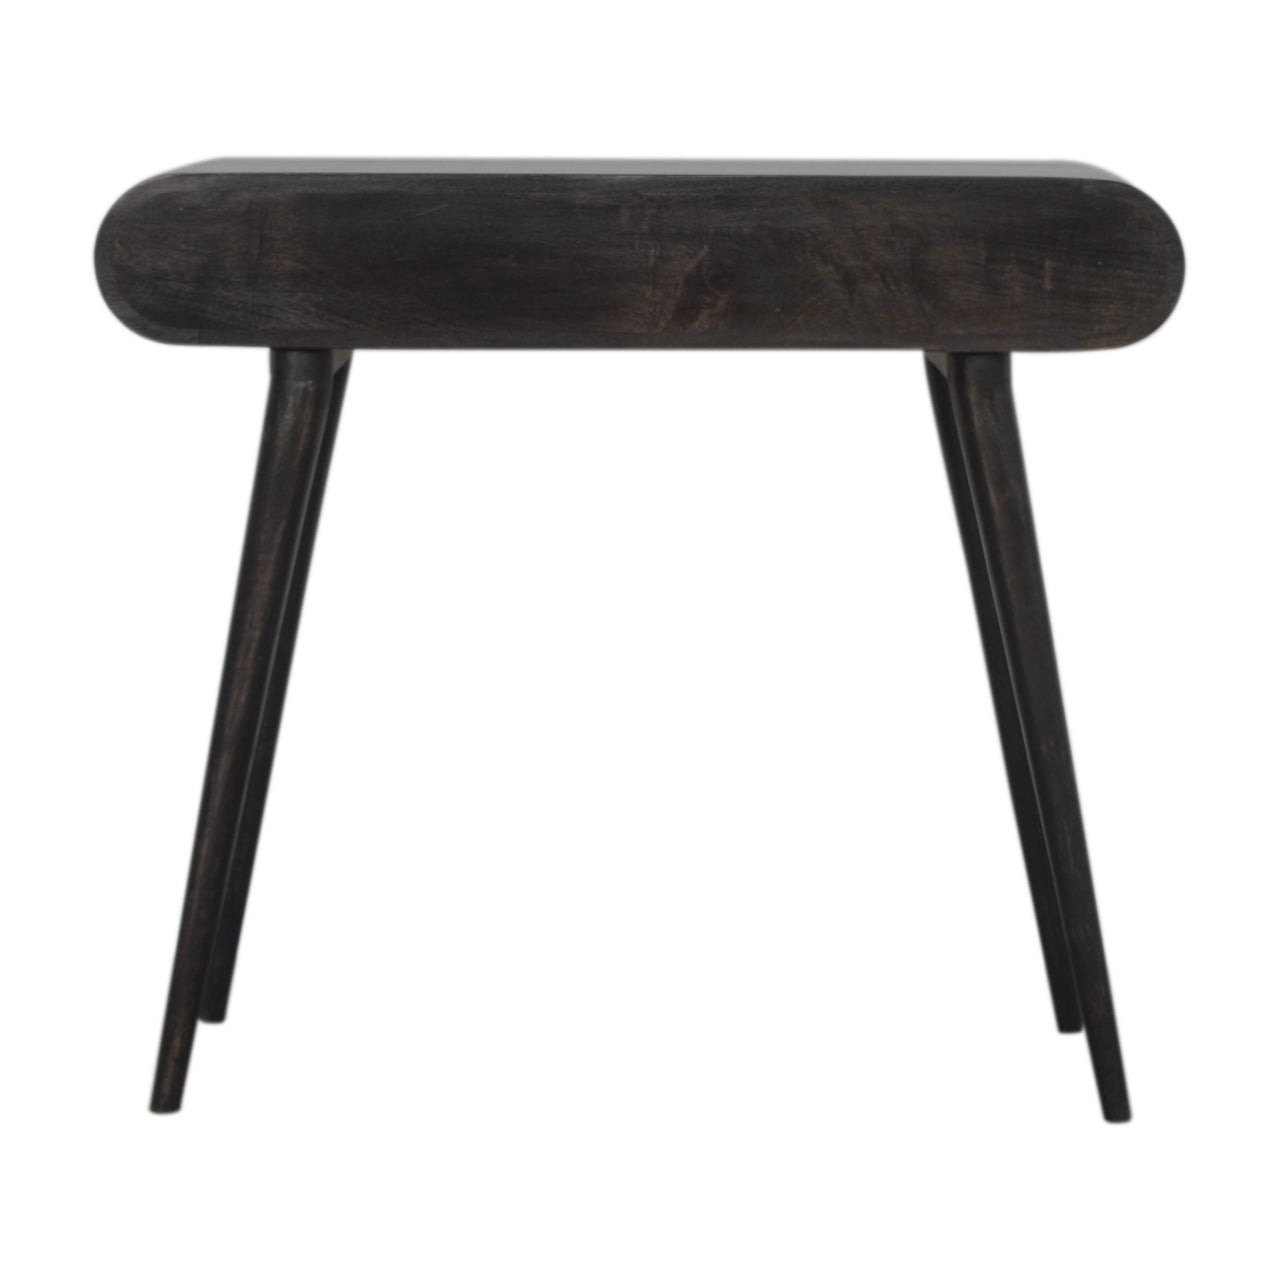 Ash Black Curved Edge Console Table - mancavesuperstore